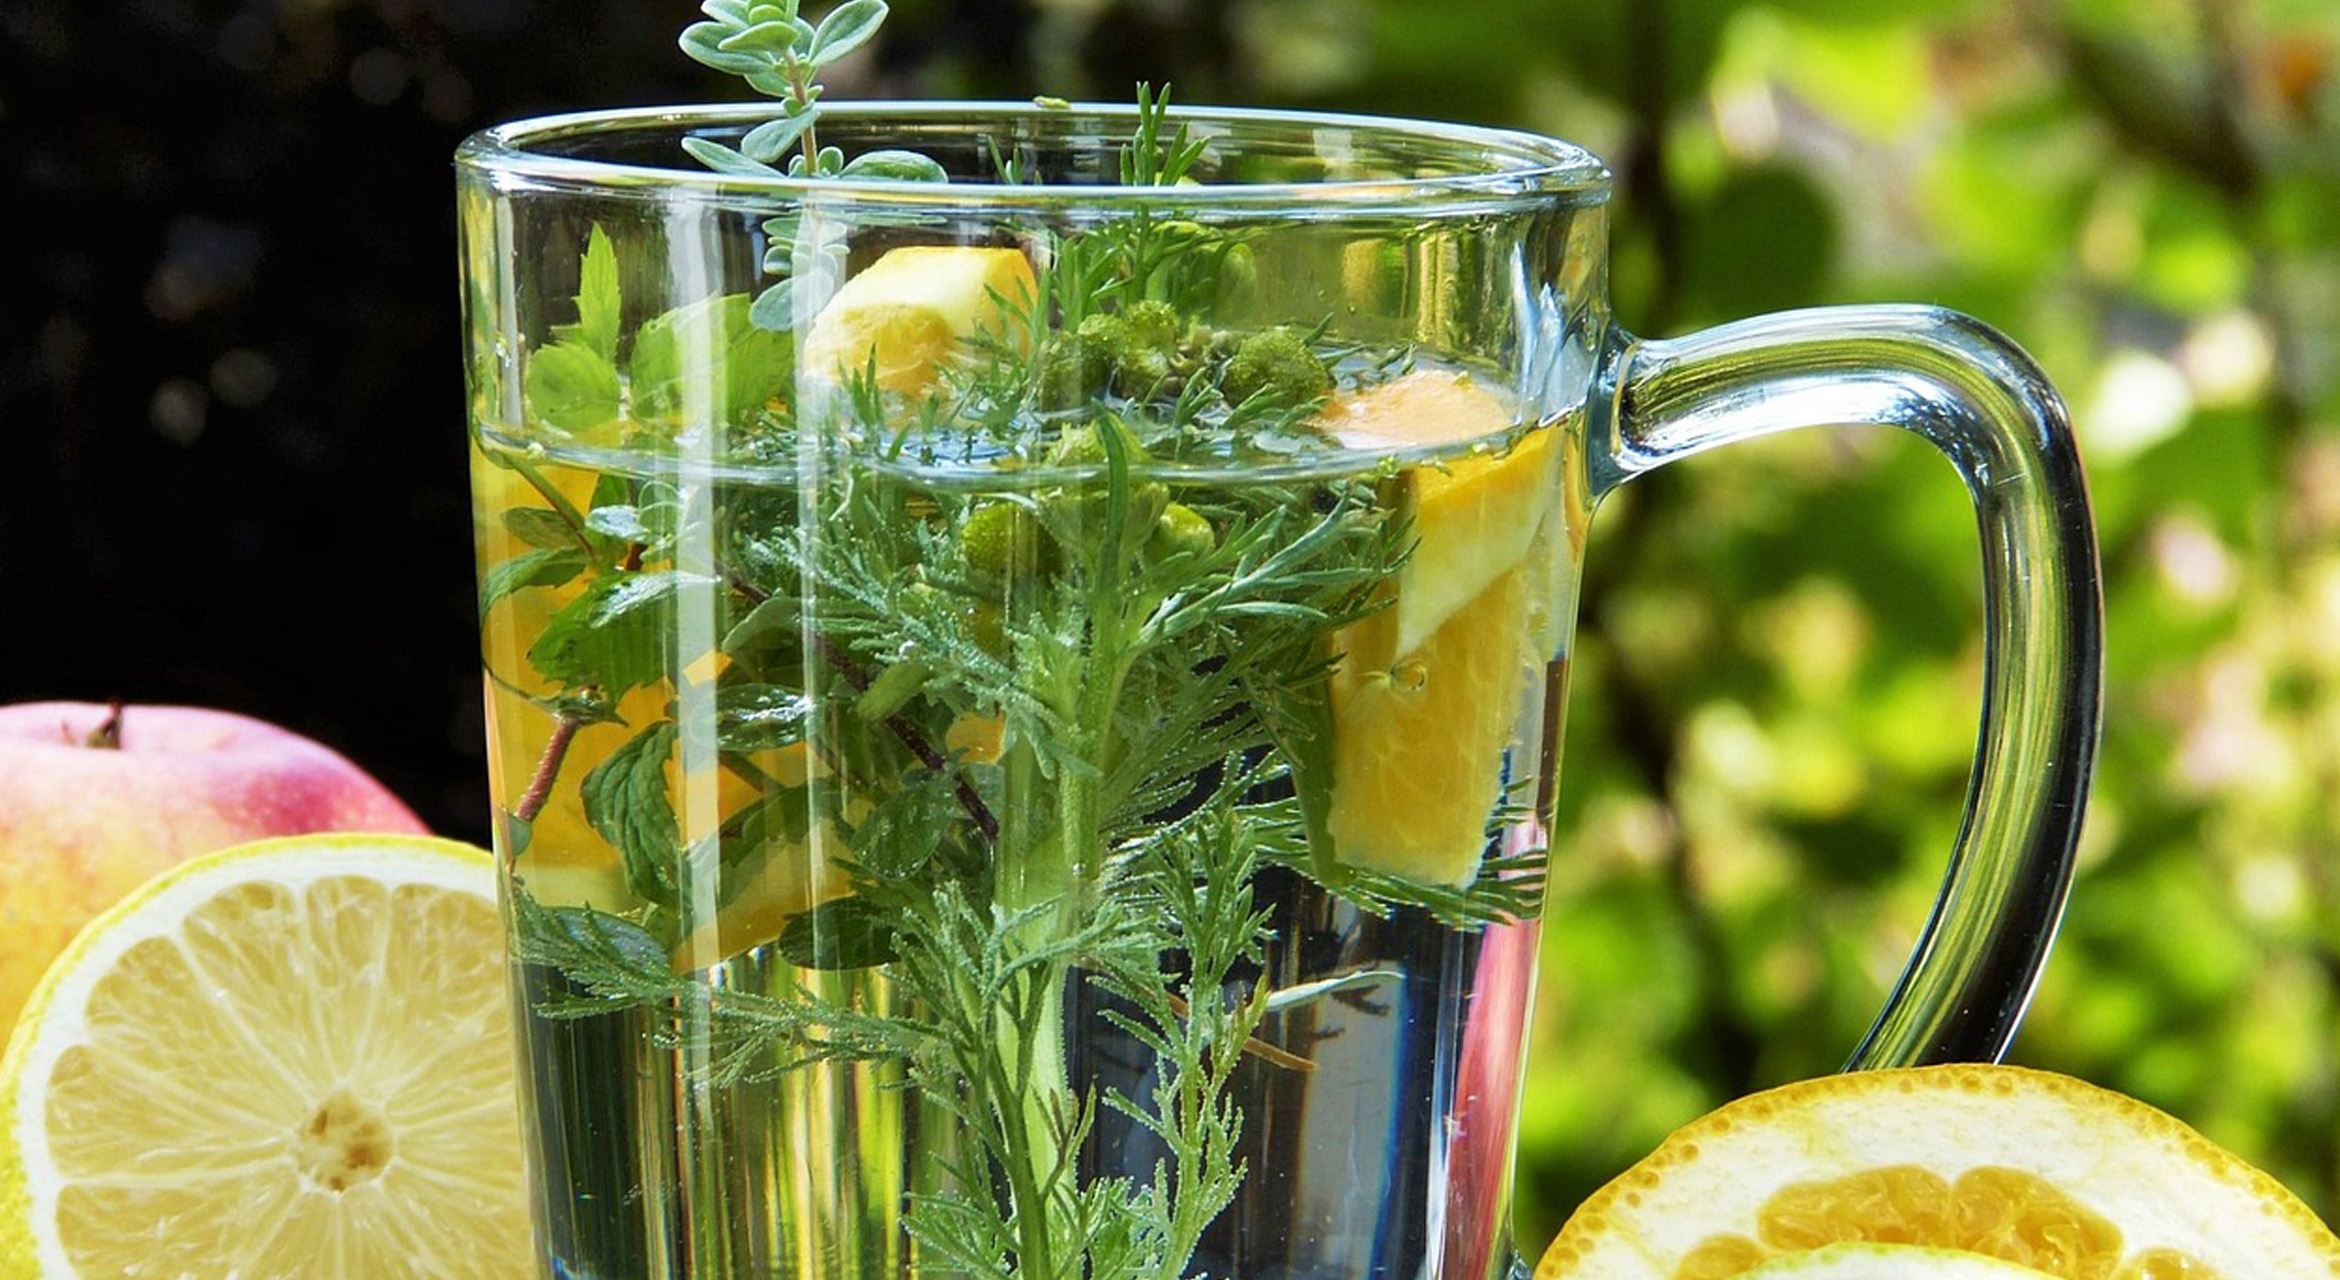 An image featuring a clear mug filled with pure water infused with slices of lemon, ginger, chamomile flowers, and various herbs. The herbs and ingredients float gracefully in the water, creating a visually appealing and refreshing beverage. The mug is set against a backdrop that accentuates a tranquil ambiance, hinting at the soothing and calming properties of the infused water. The scene evokes a sense of wellness, natural healing, and rejuvenation.